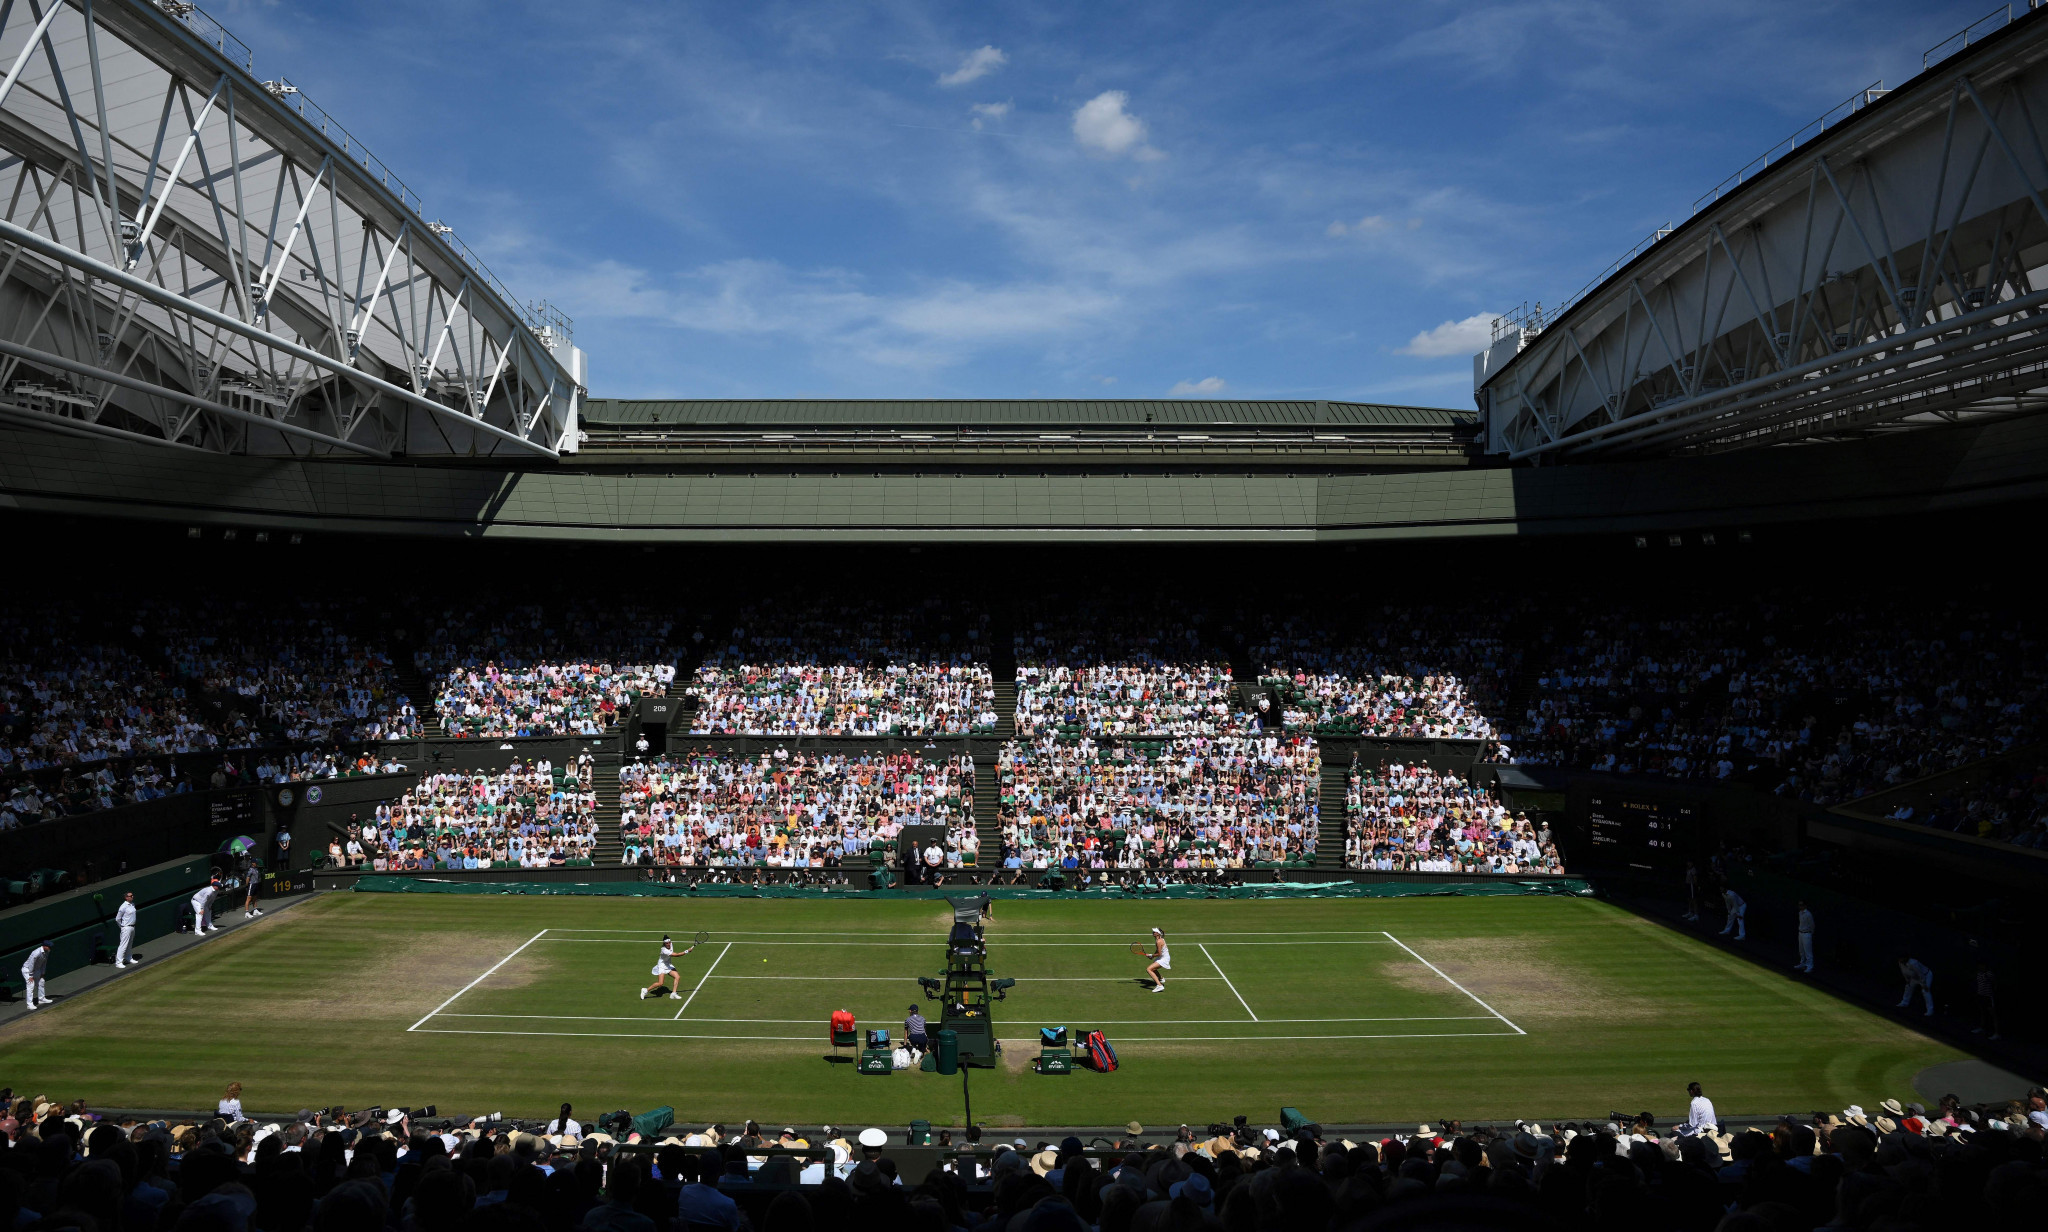 The women's singles final was played on Centre Court ©Getty Images